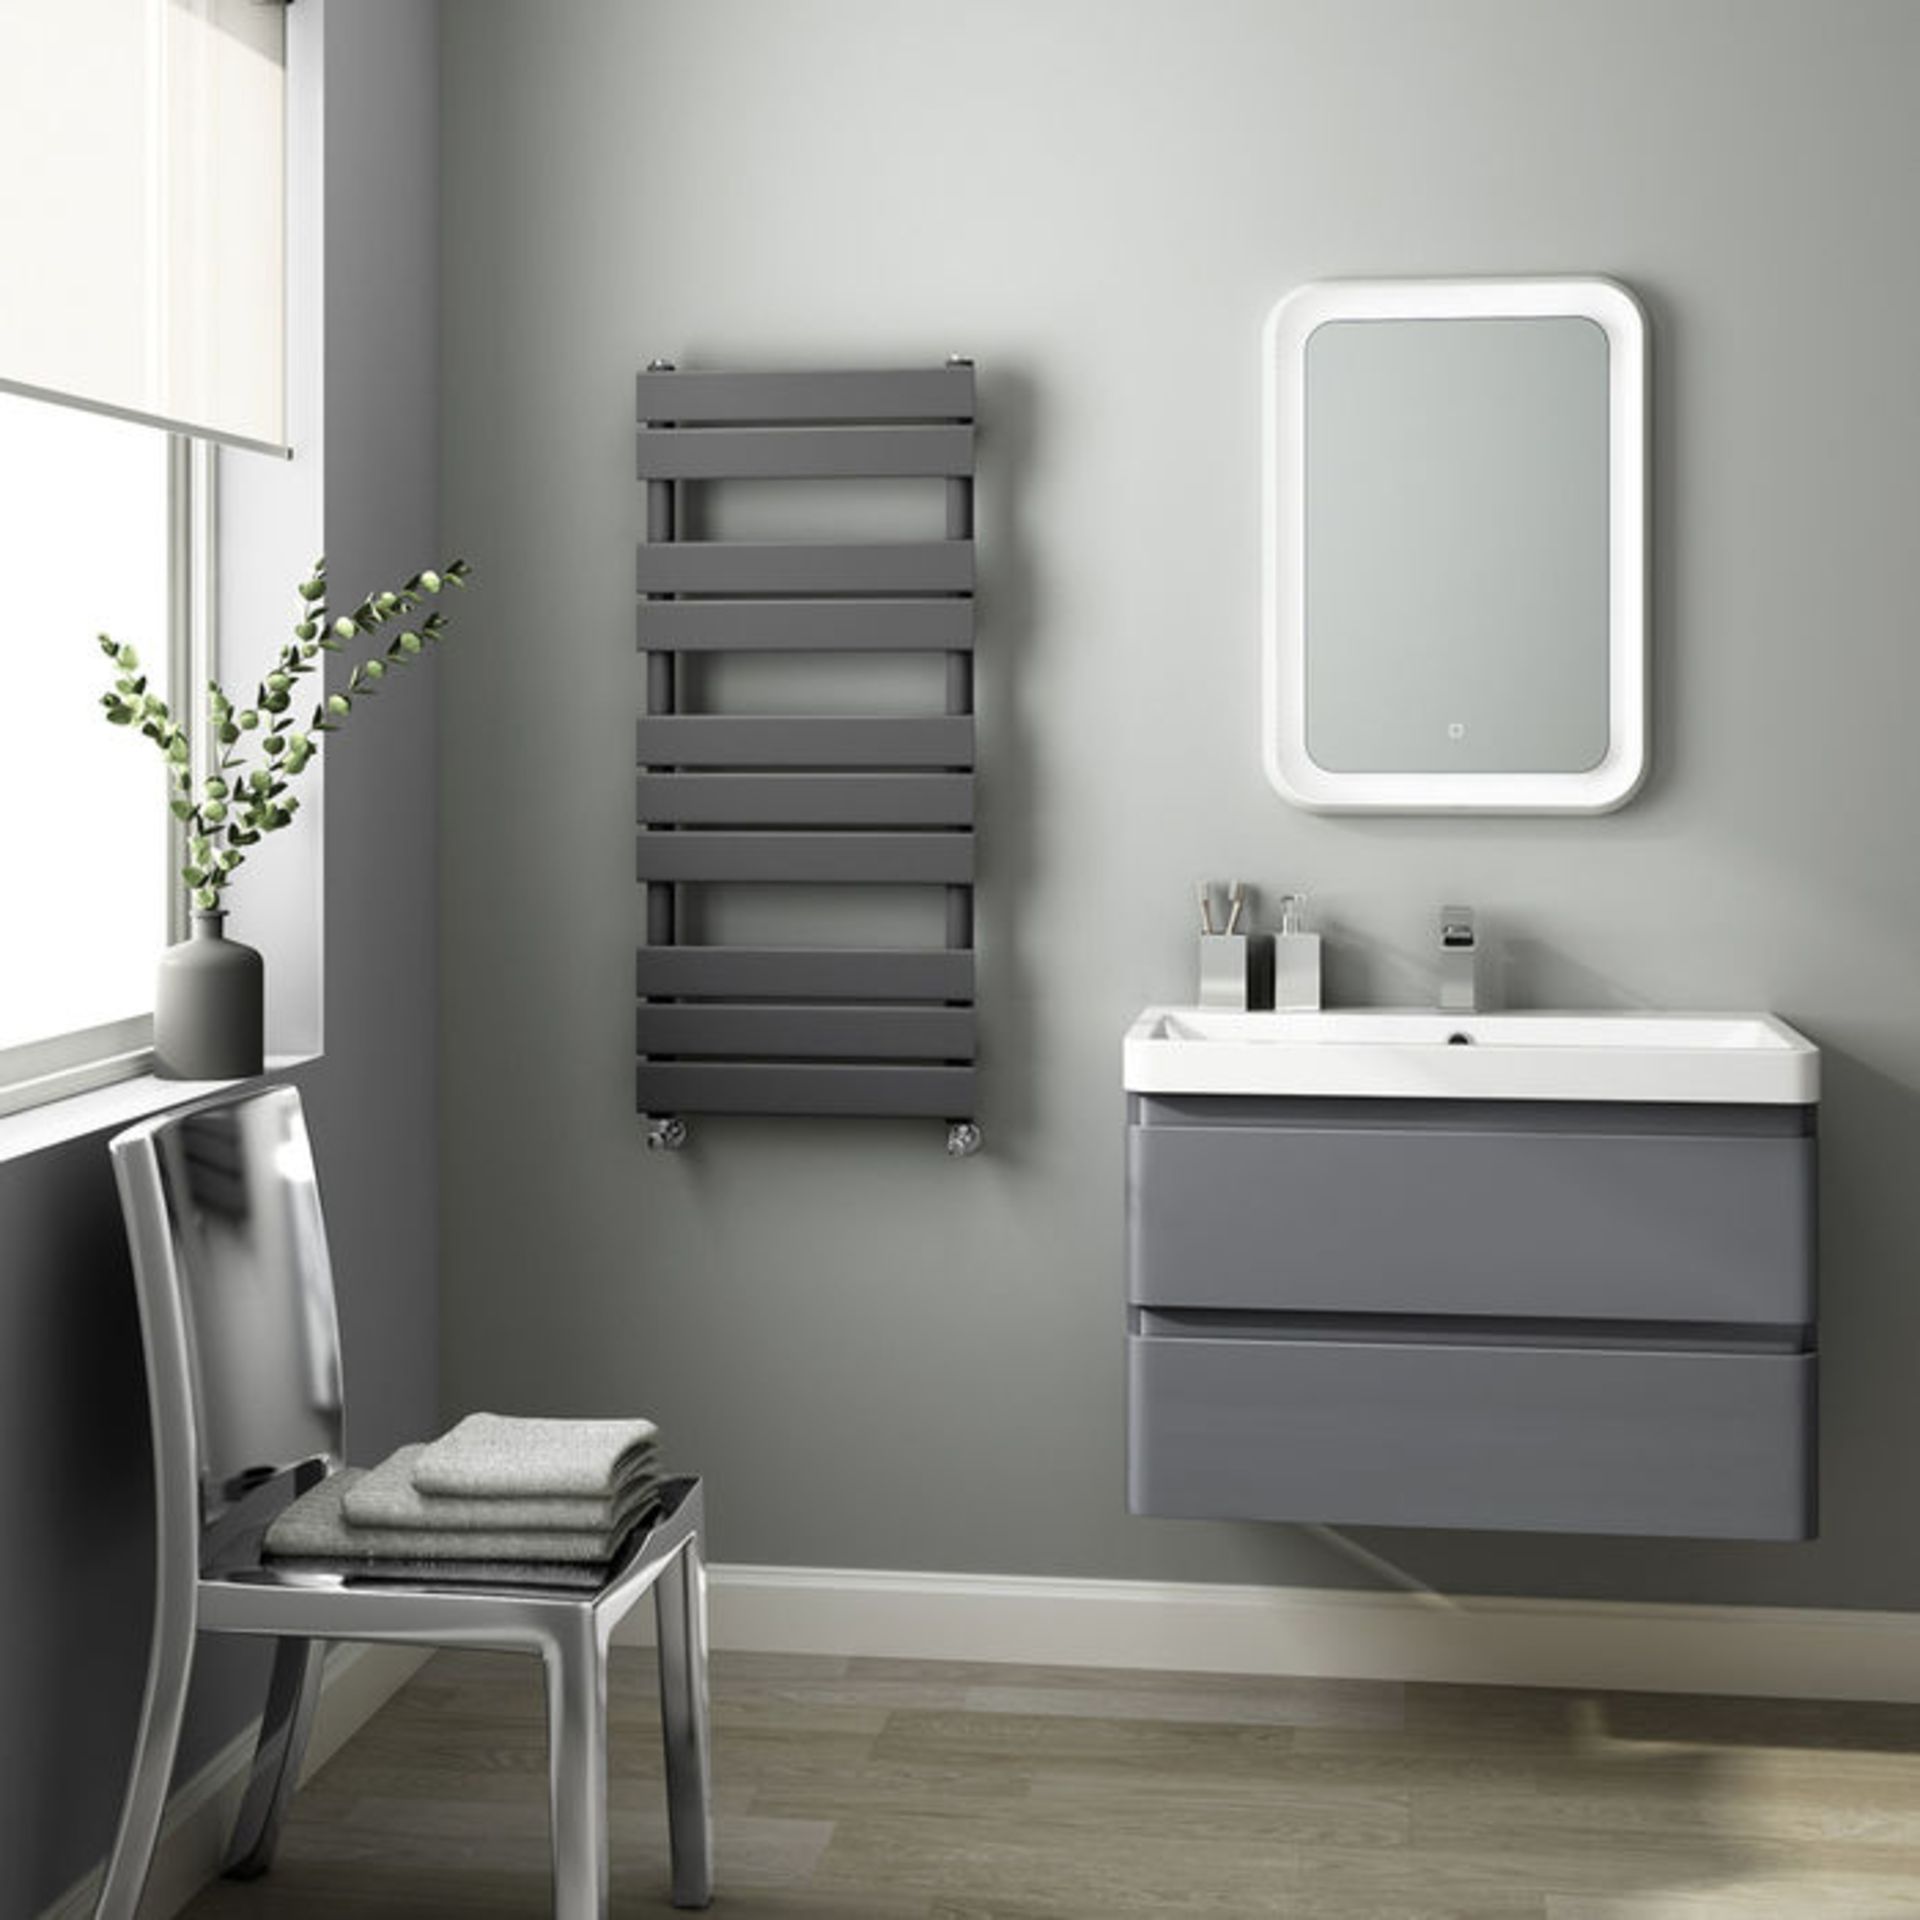 (ZZ121) 1000x450mm - 25mm Tubes - Anthracite Heated Straight Rail Ladder Towel Radiator. This - Image 2 of 3